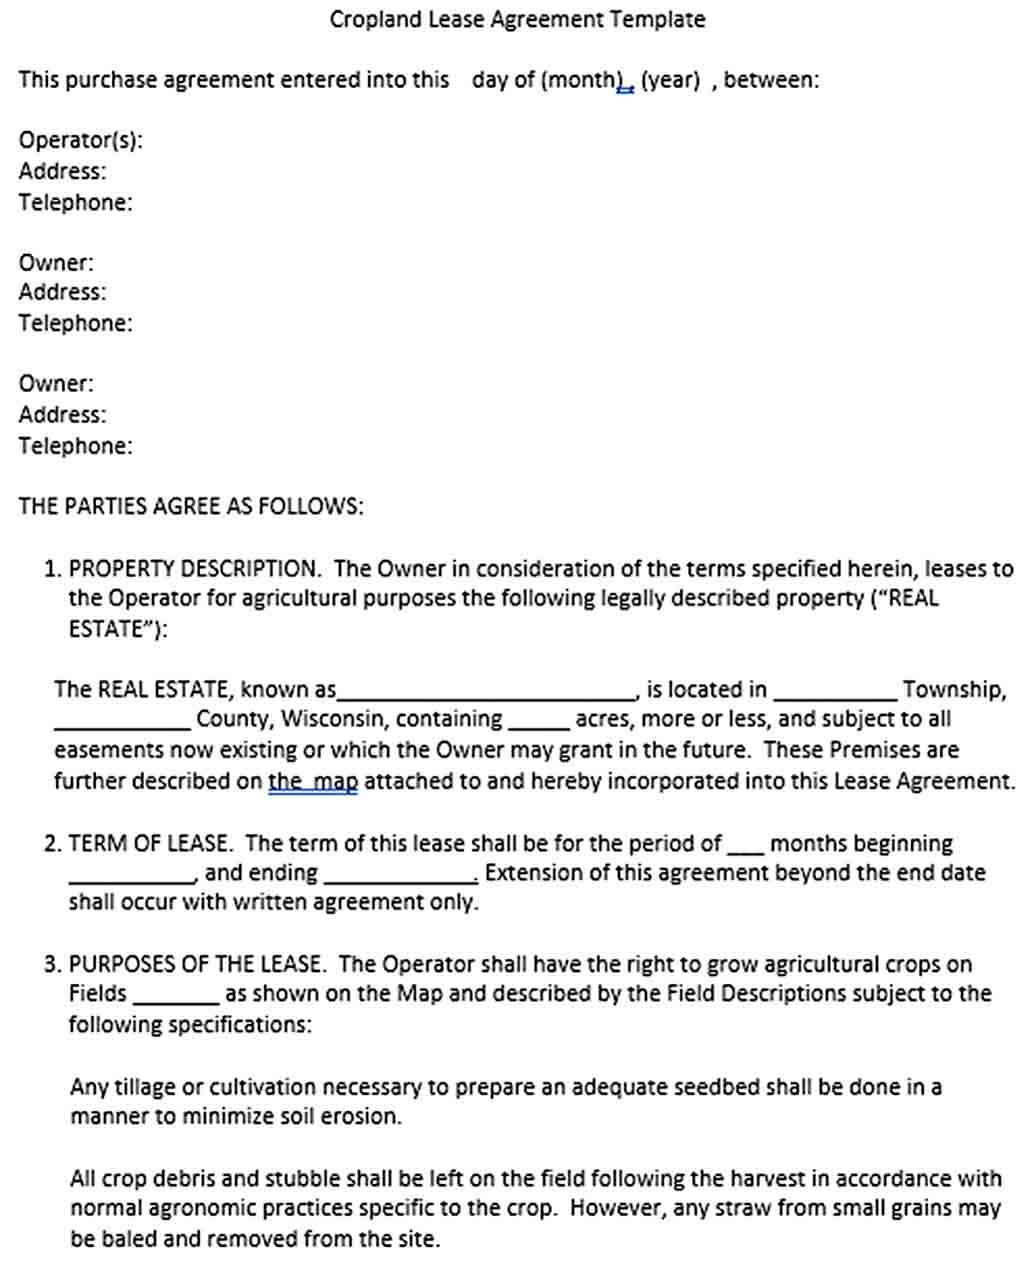 Sample BasicCropland Lease Agreement Template